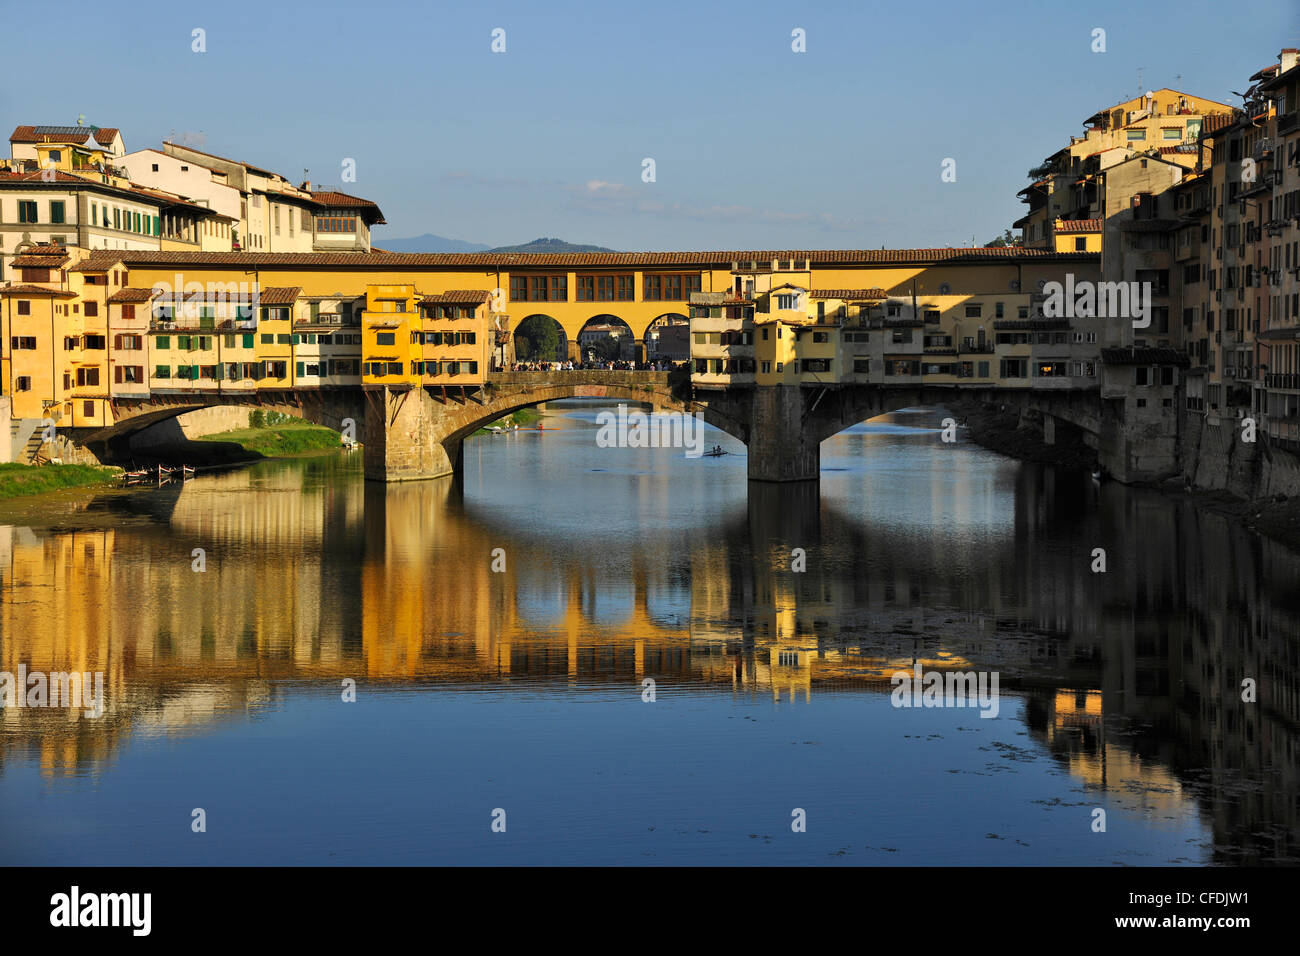 The bridge Ponte Vecchio above Arno river in the sunlight, Florence, Tuscany, Italy, Europe Stock Photo